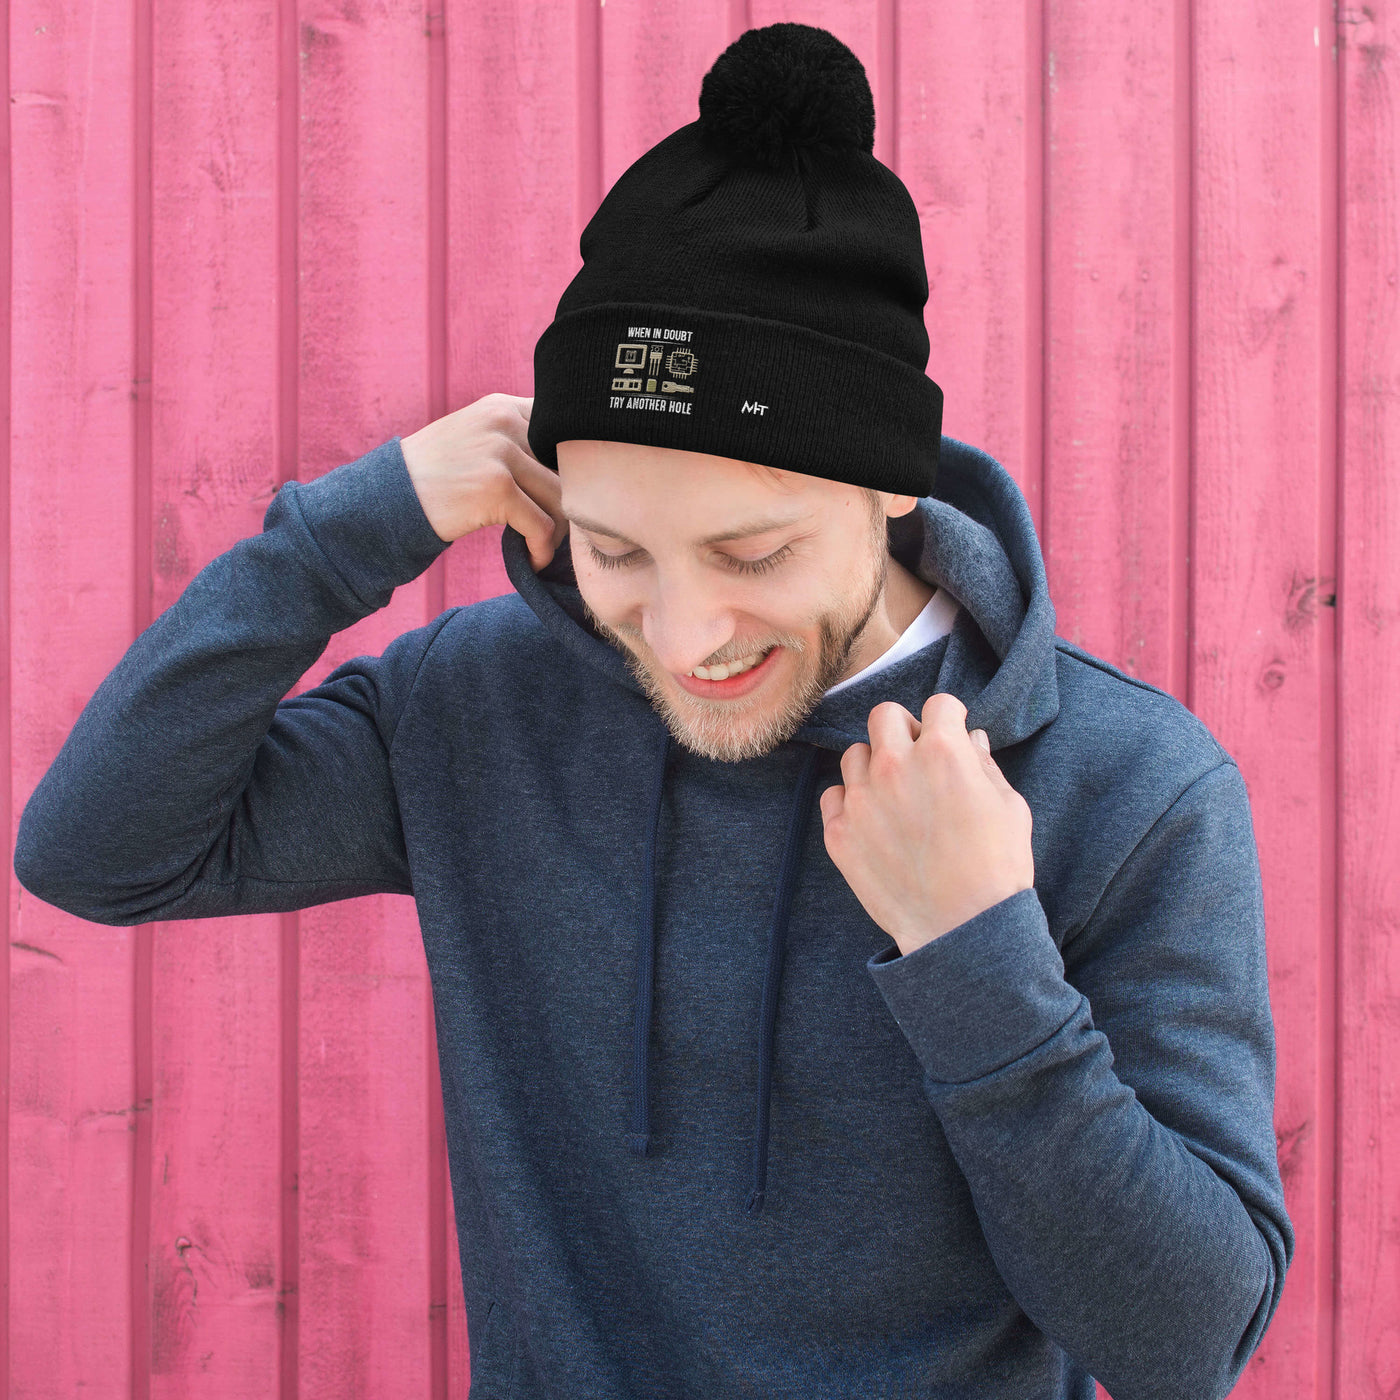 When in doubt, Try another hole V1 - Pom-Pom Beanie